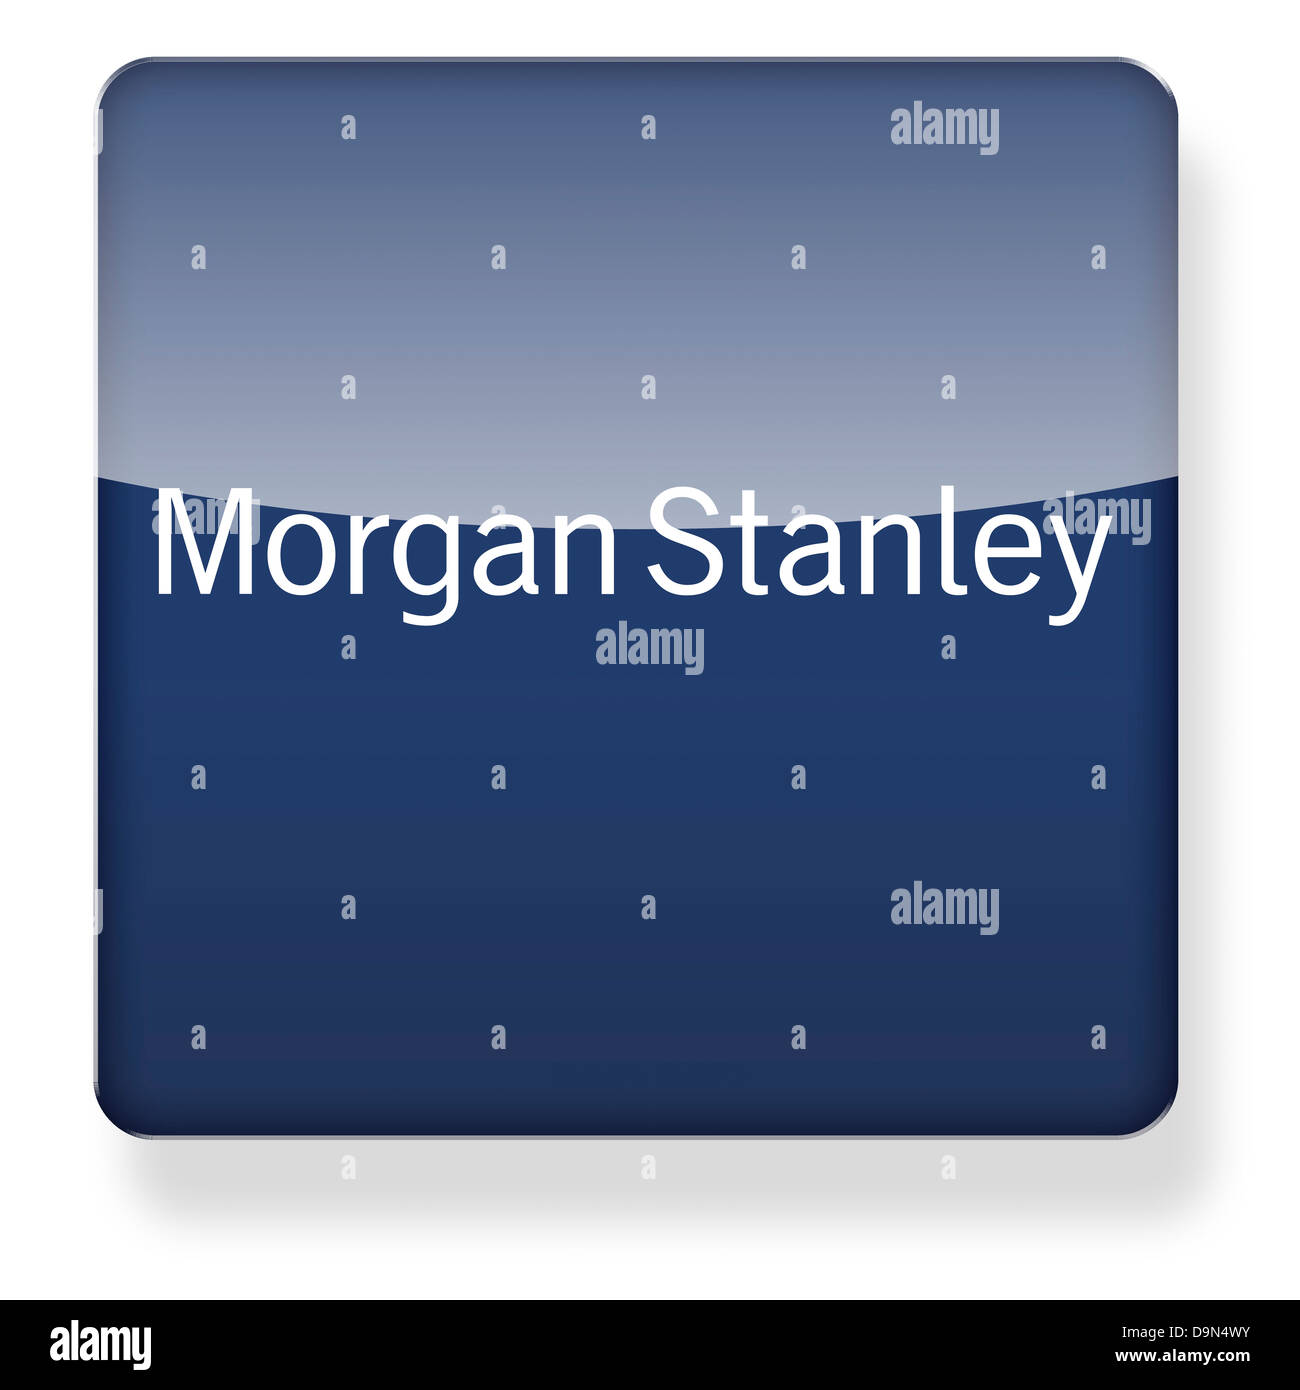 Morgan Stanley logo as an app icon. Clipping path included. Stock Photo